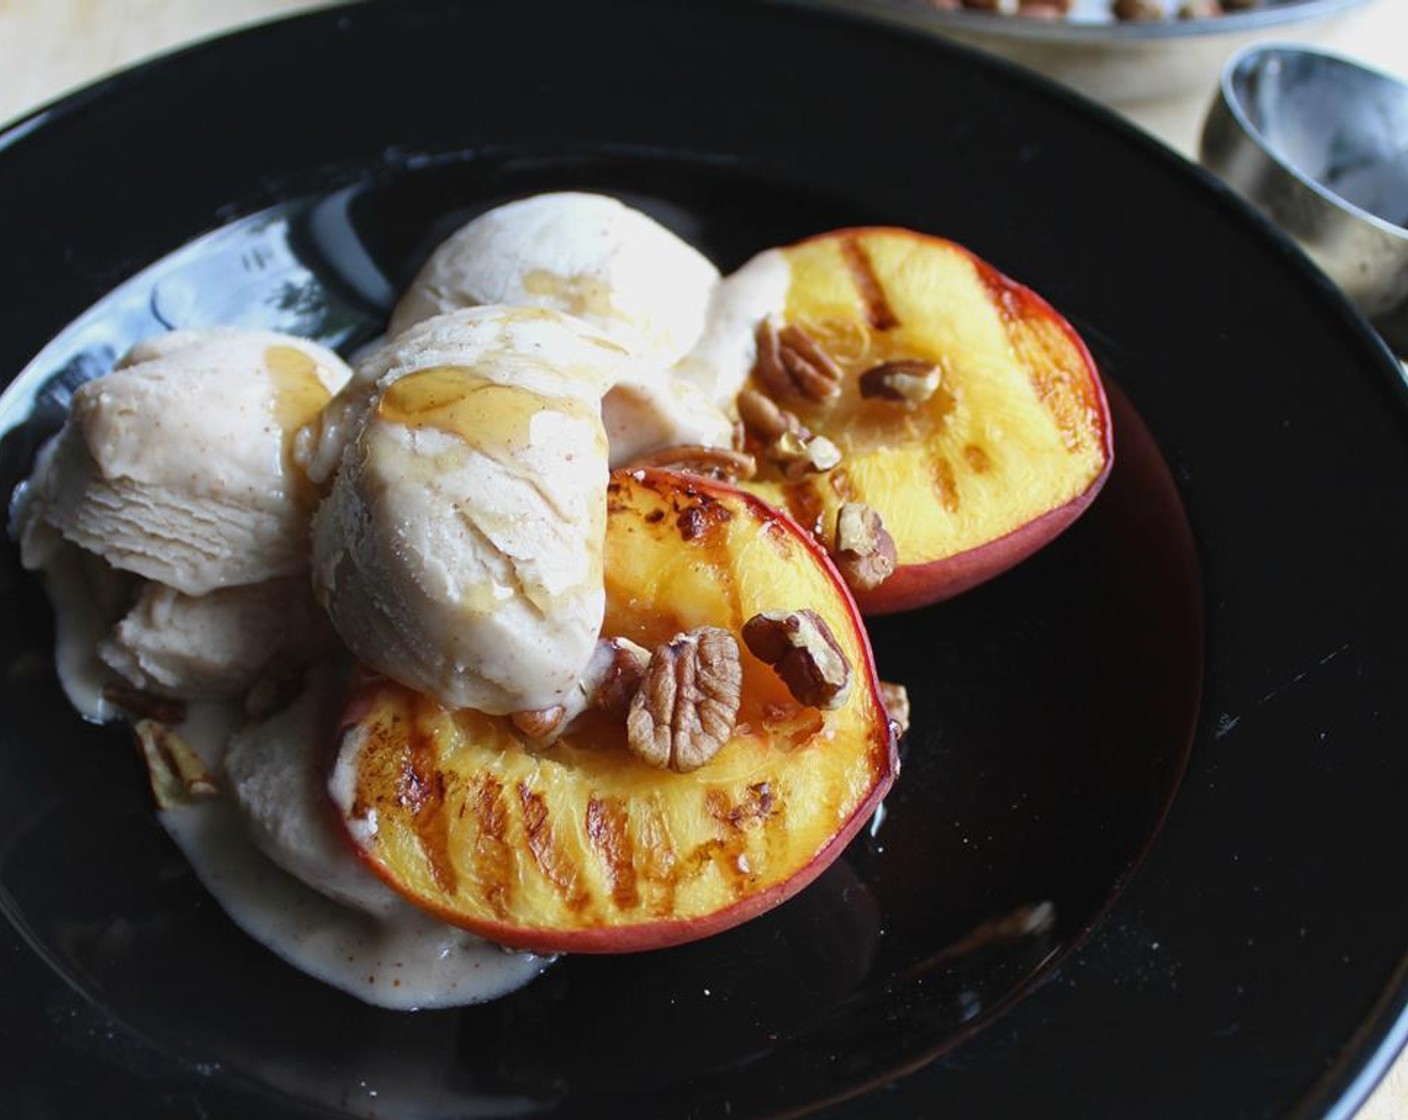 step 5 Fill your bowl with grilled peaches, a couple scoops of Vanilla Ice Cream (2 cups), a drizzle of Honey (1/4 cup) and some Pecans (1/4 cup).